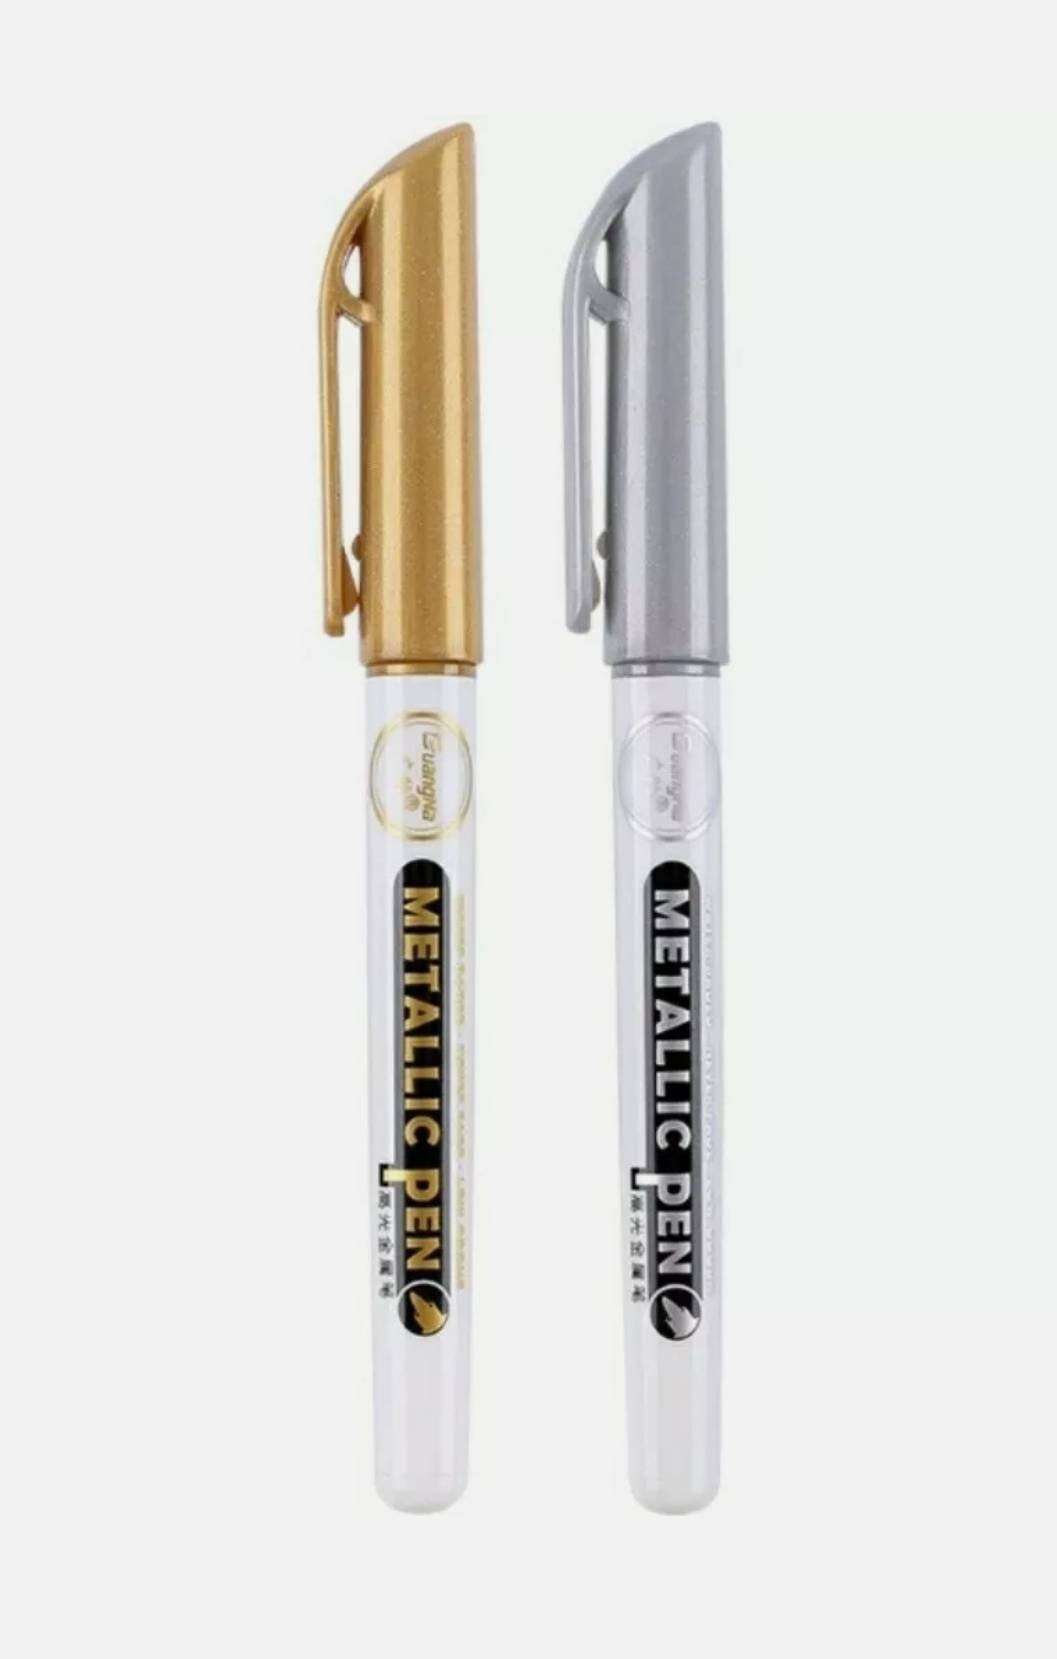 6 Metallic Permanent Marker Pens, 3 Gold/3 Silver Markers, Resin Coaster  Edging Pen Set-jewellery/cards-0.7cm Tip 